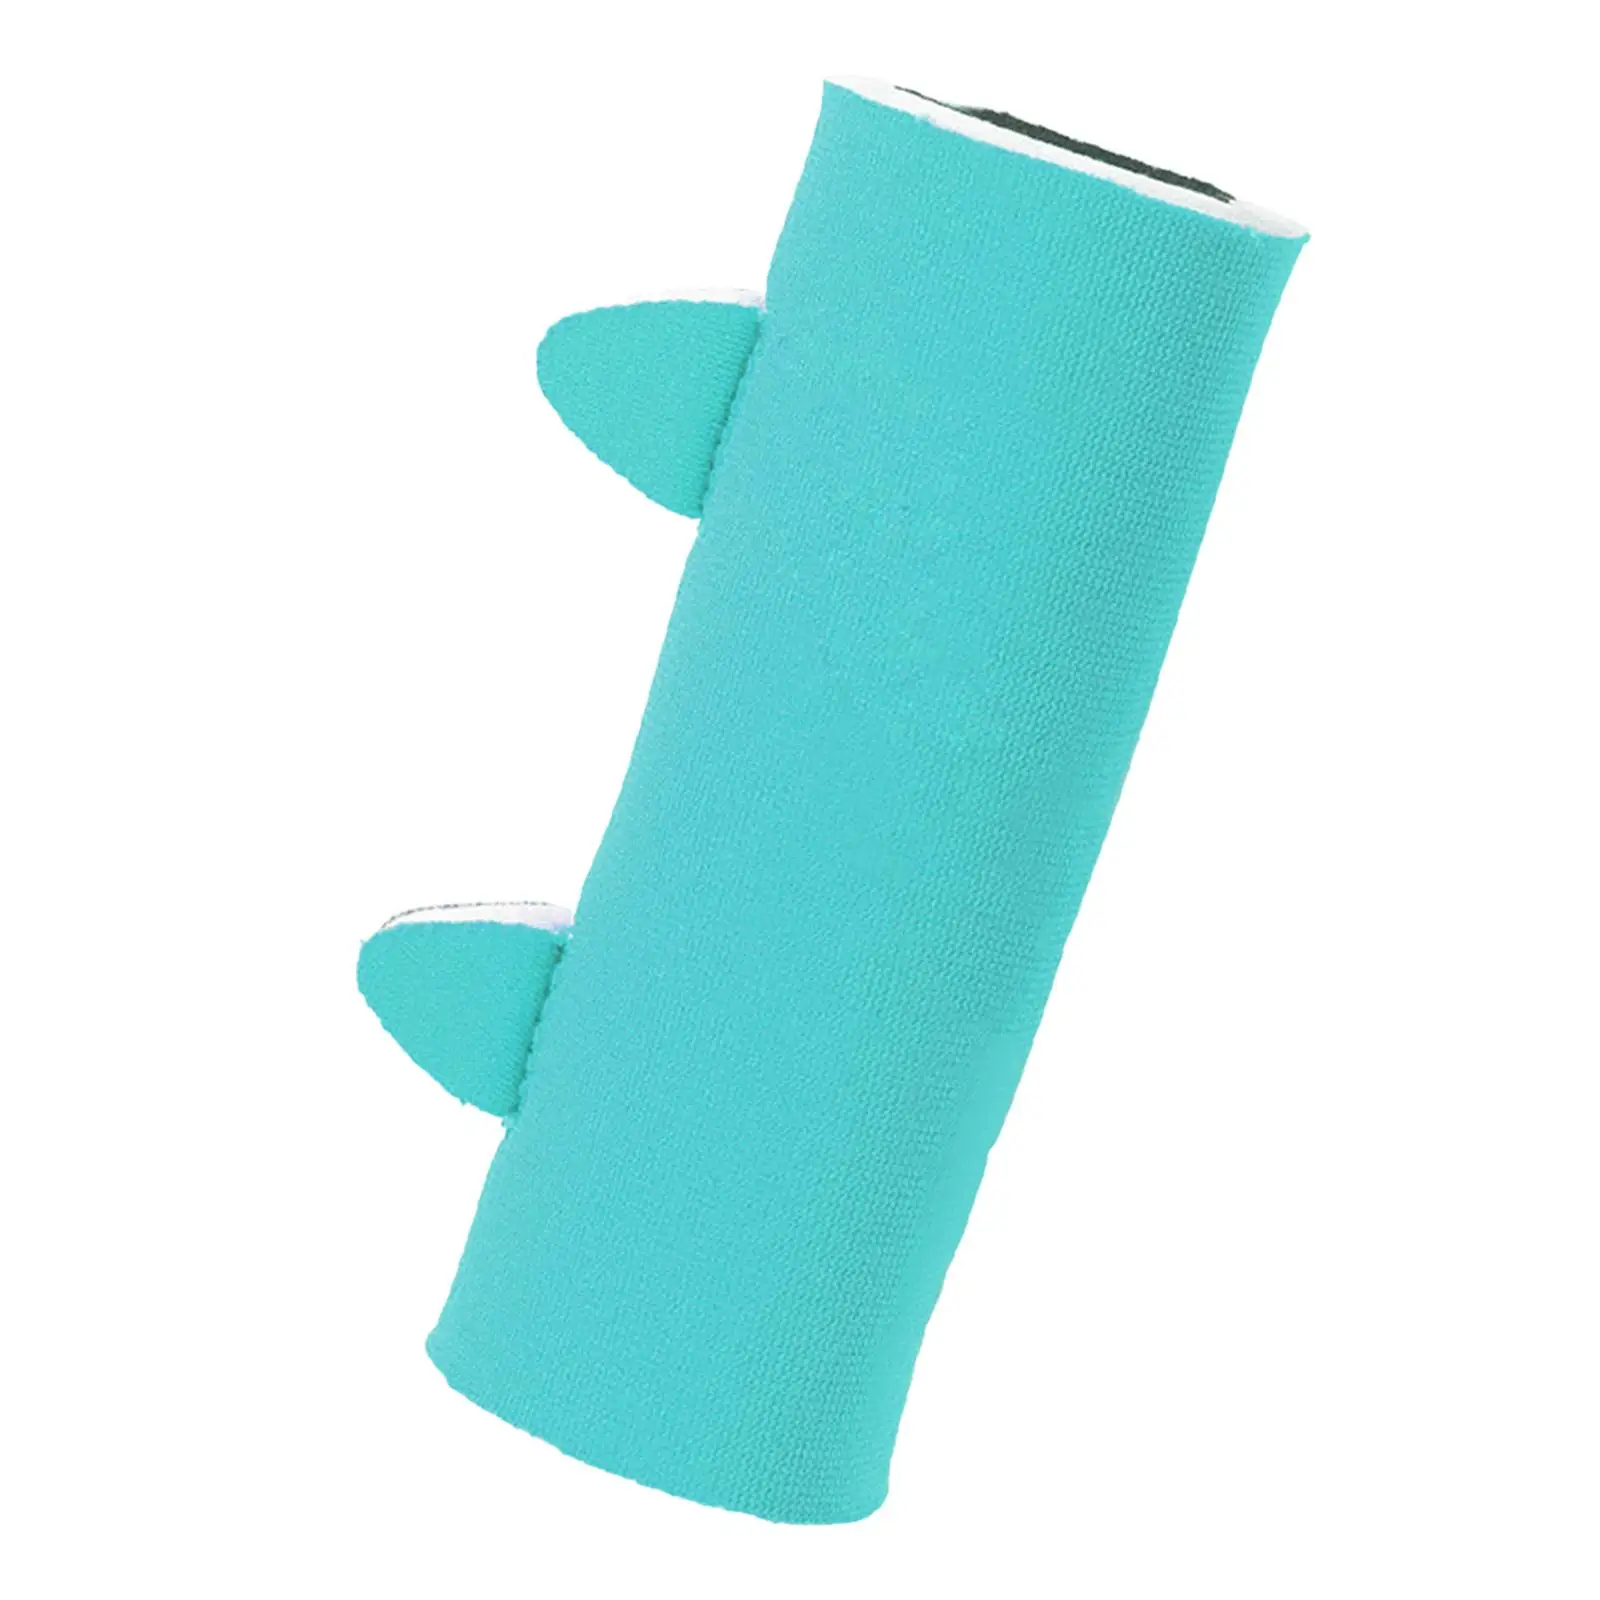 Diving Snorkel Protective Sleeve Snorkeling Shockproof Sun Protection Adult Protective Cover Case for Swimming Water Sports Gear